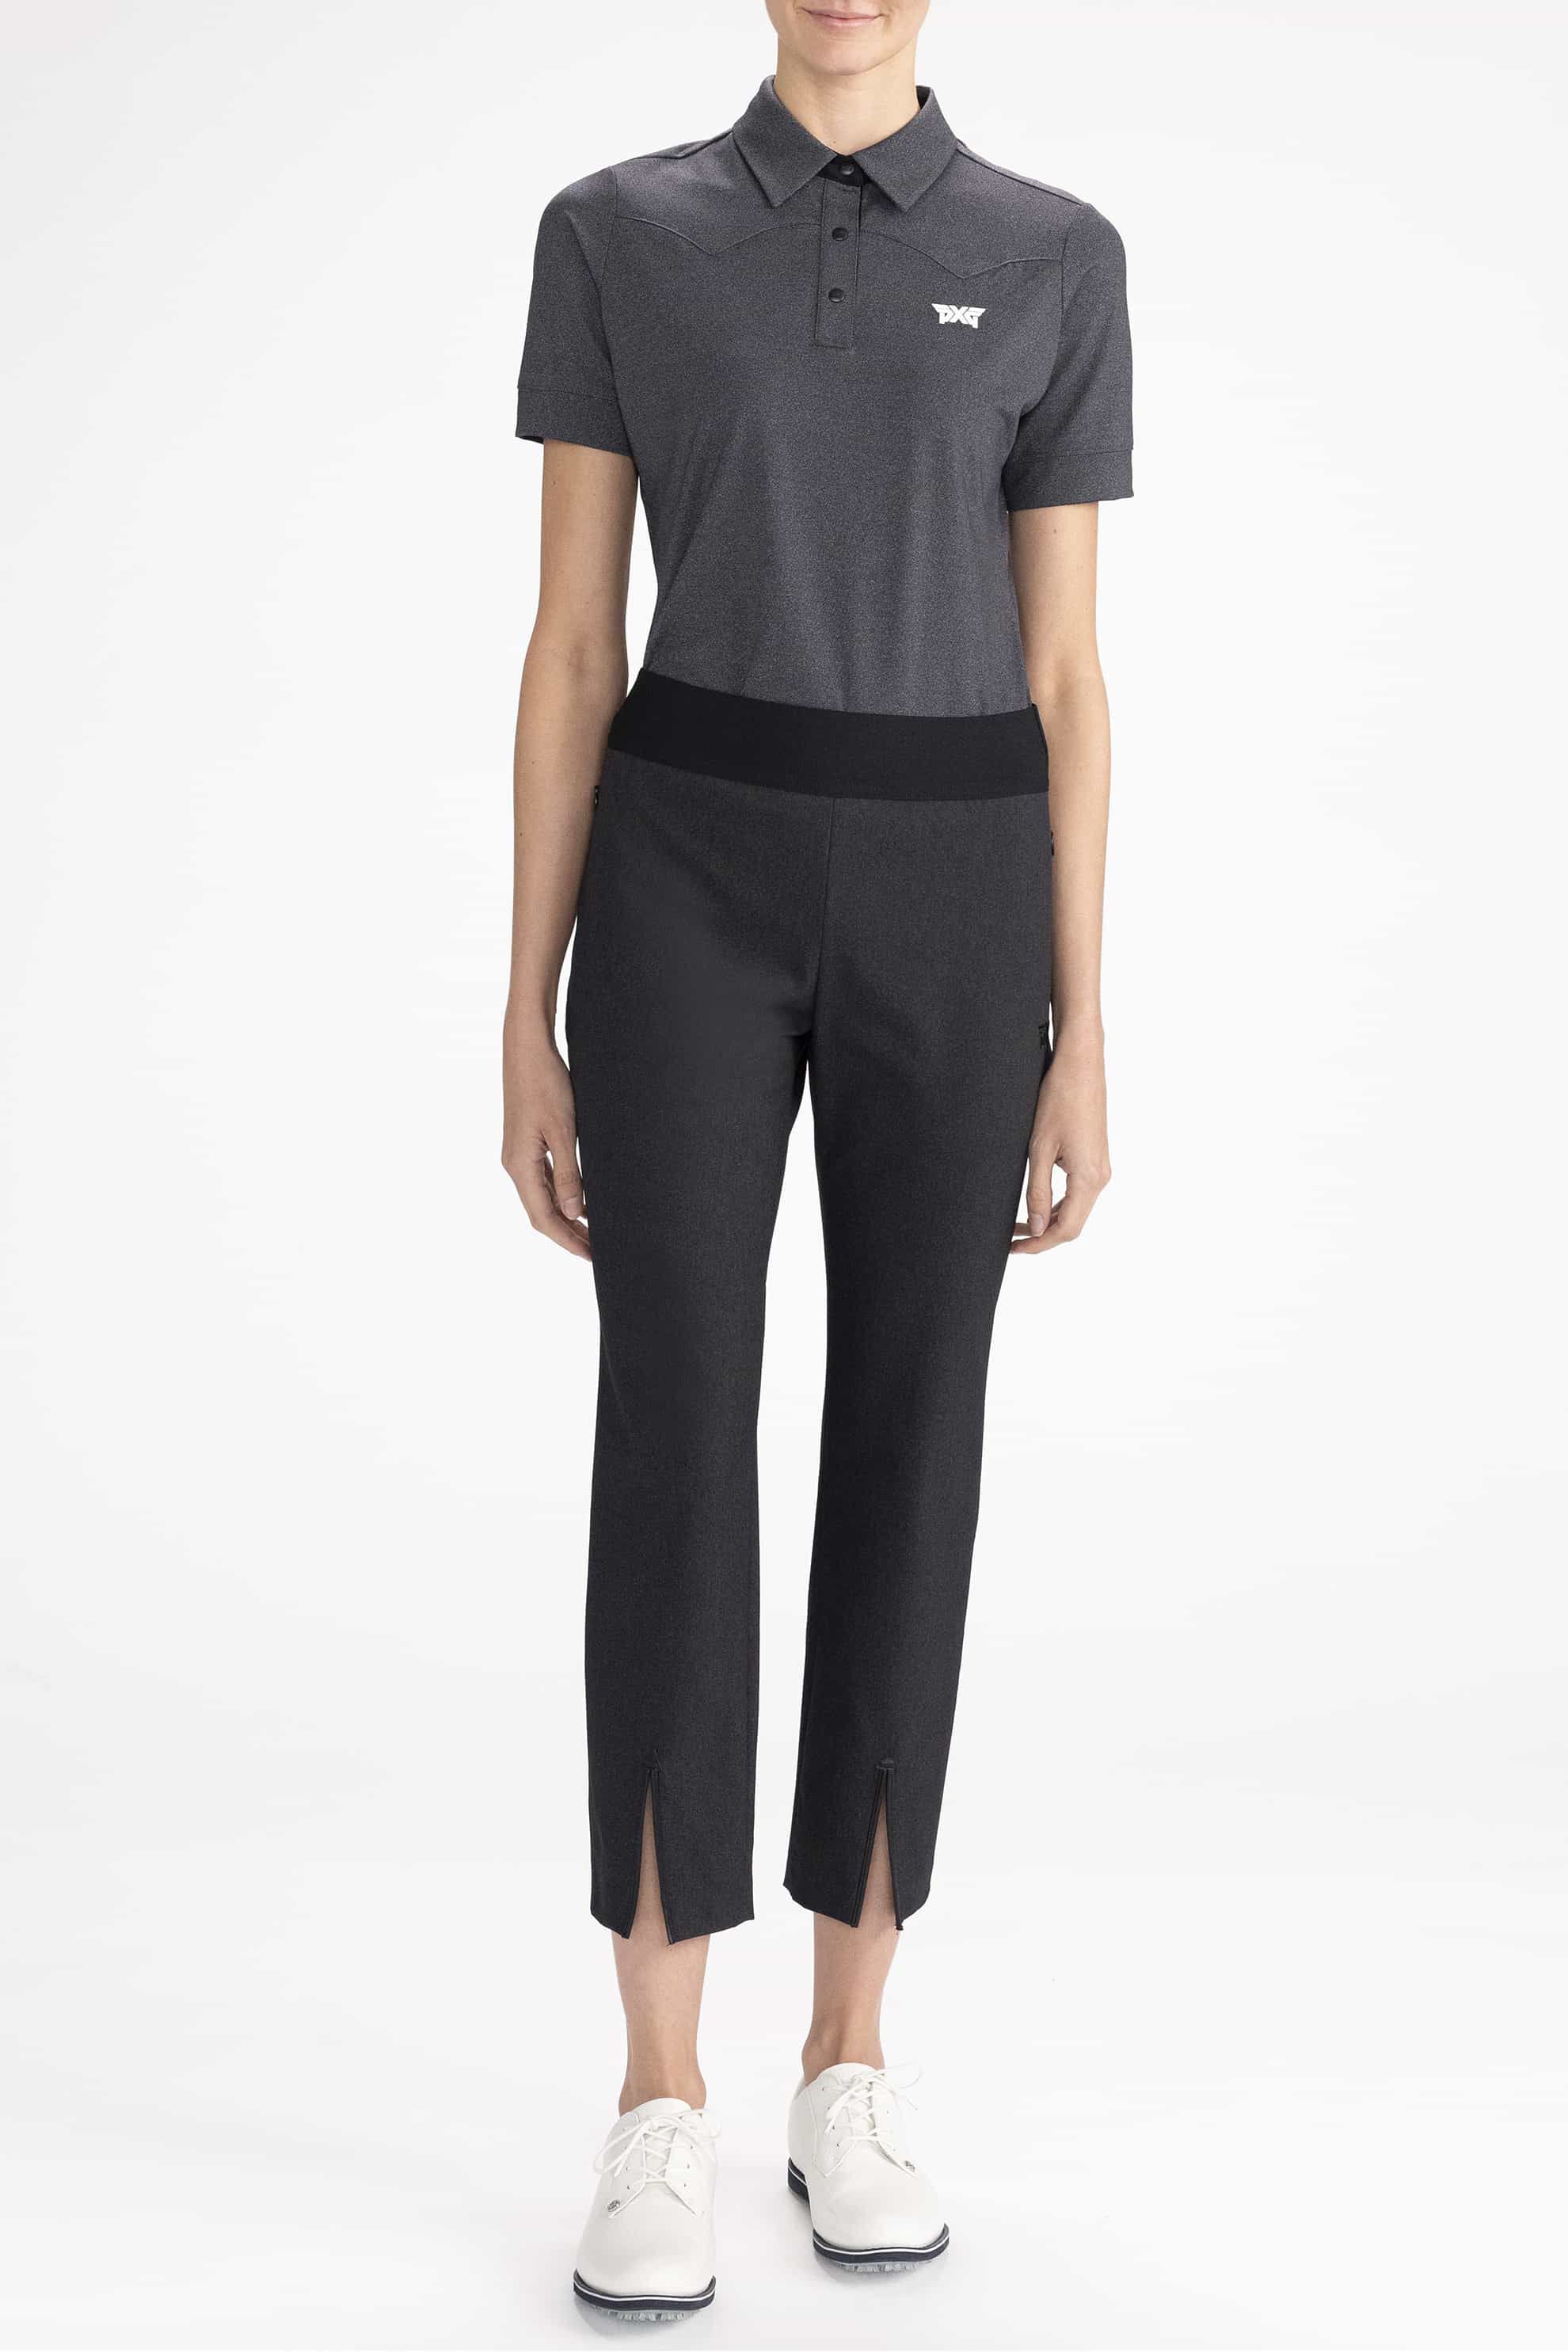 Topshop Petite cupro flared pants with front slits in washed black | ASOS